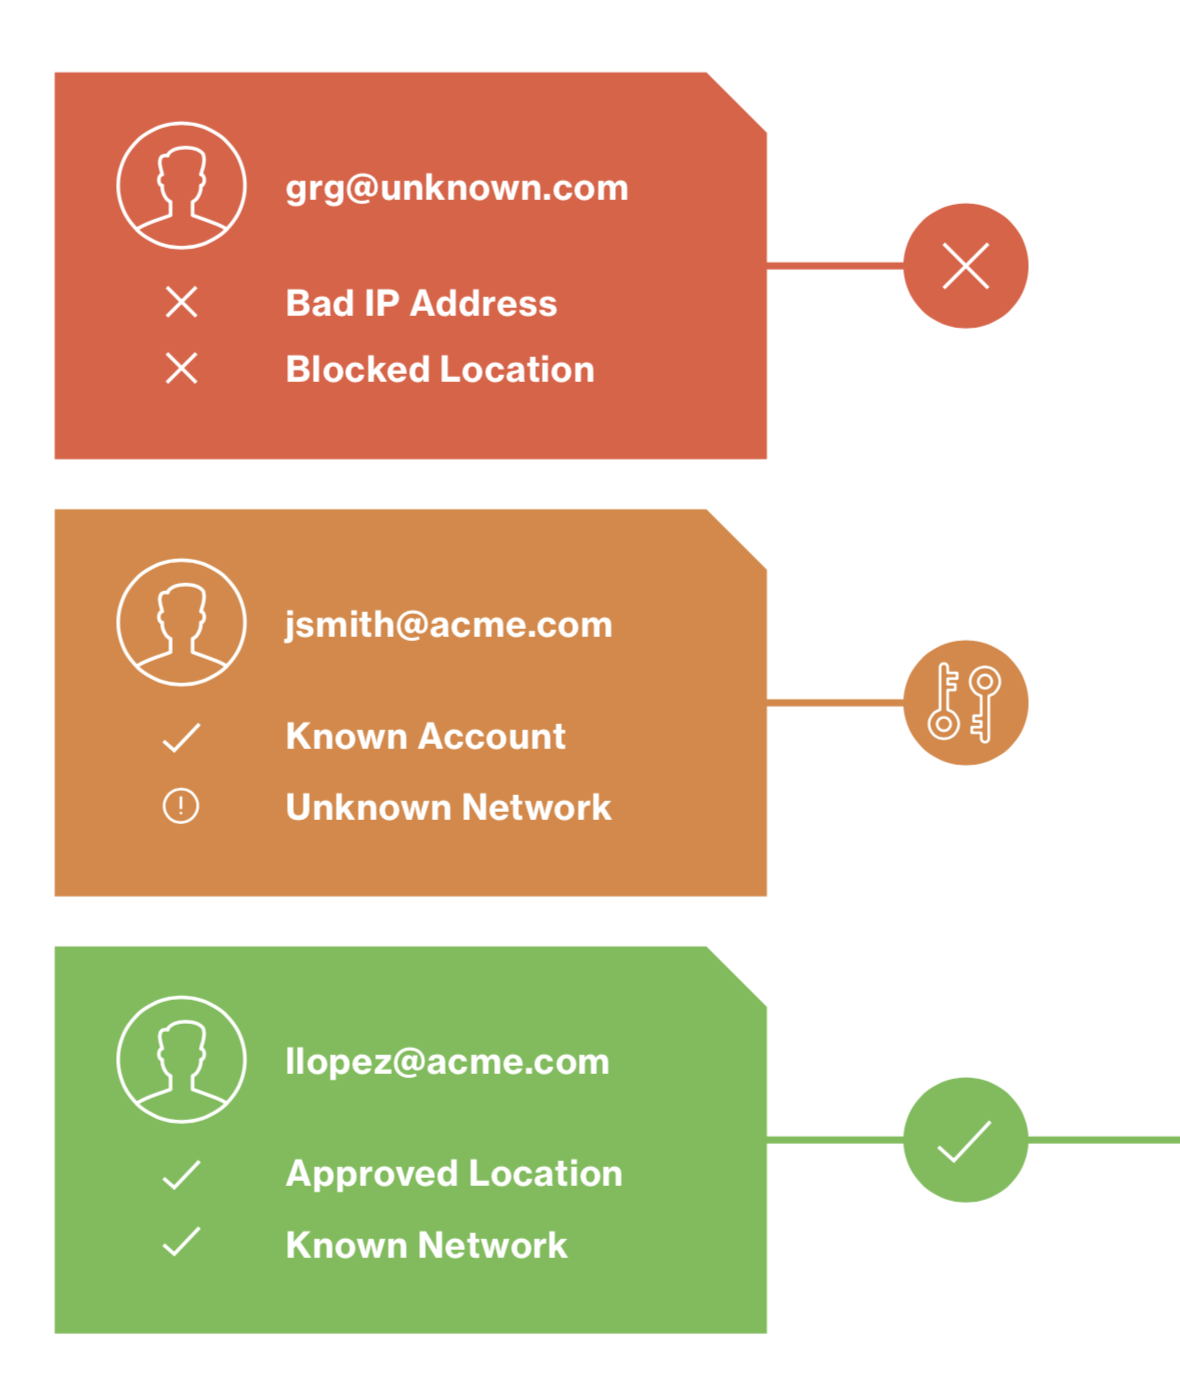 3 users: bad IP, blocked location (red); known account, unknown network (orange); approved location, known network (green).